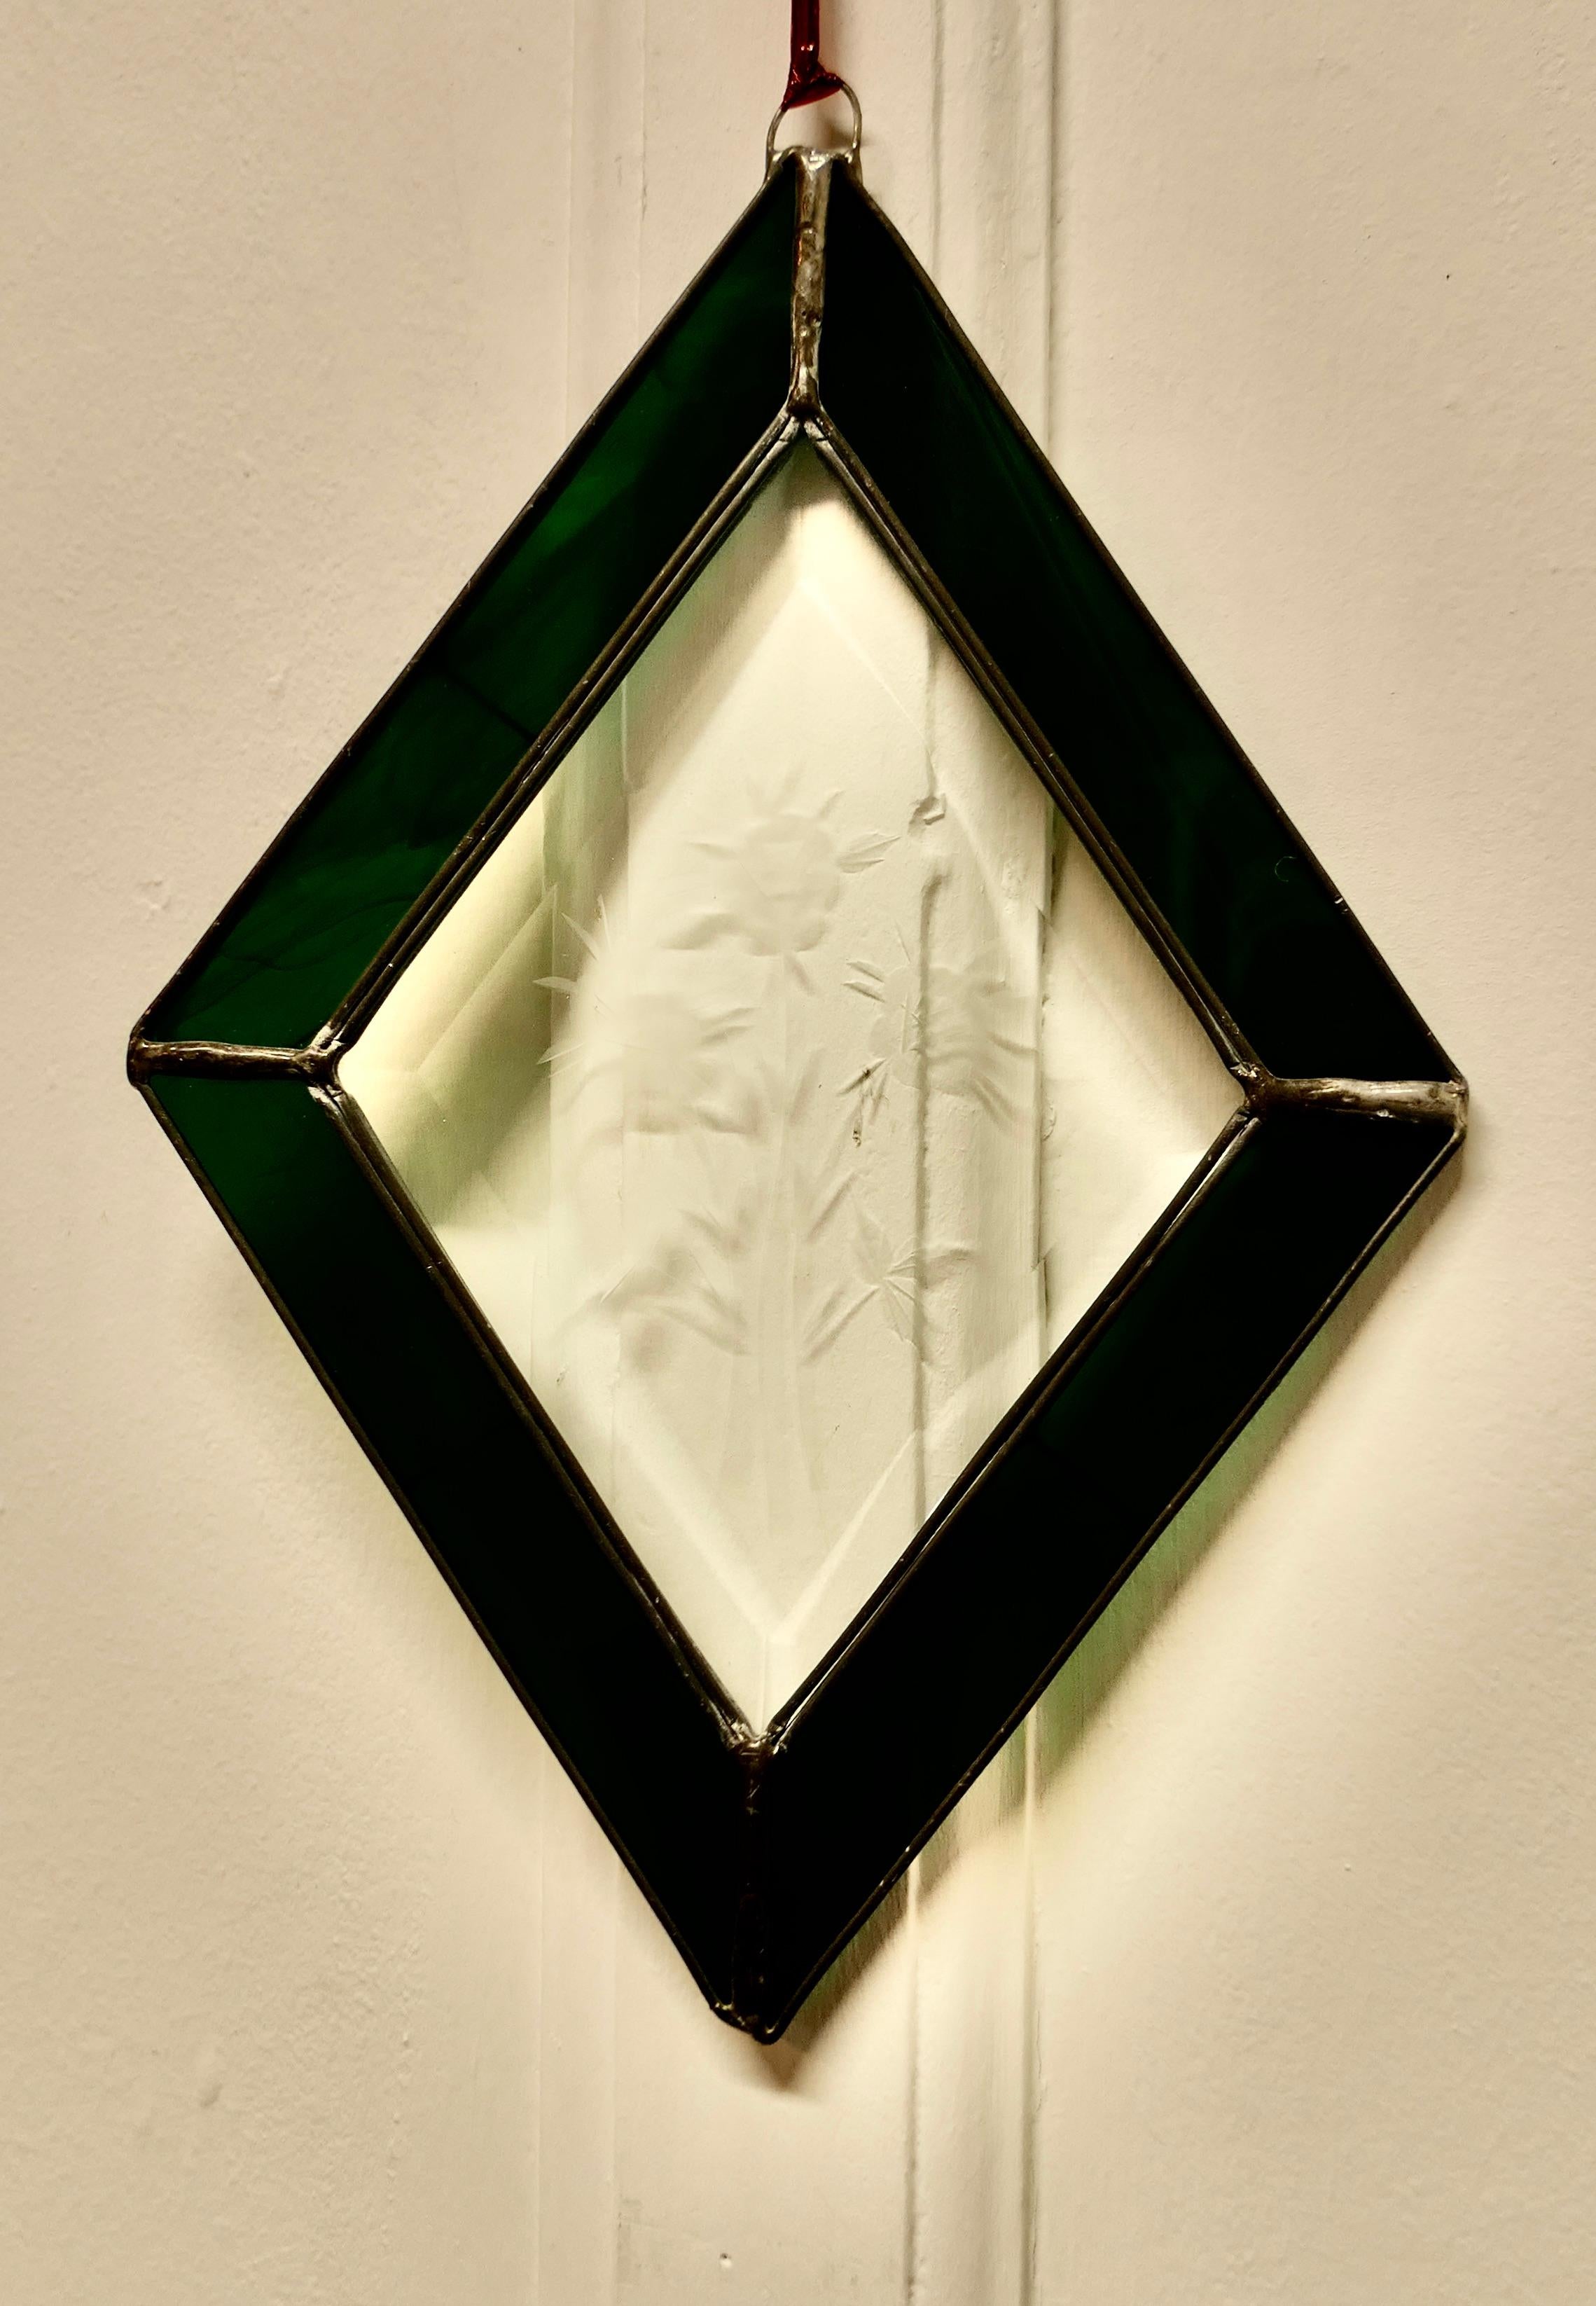 French hand made antique stained glass window panel

This lovely Artisan made piece has been made from 19th century Green Iridescent and Etched Glass, skilfully set to make a Diamond shaped pattern
The Panel is a one off, there is only one like